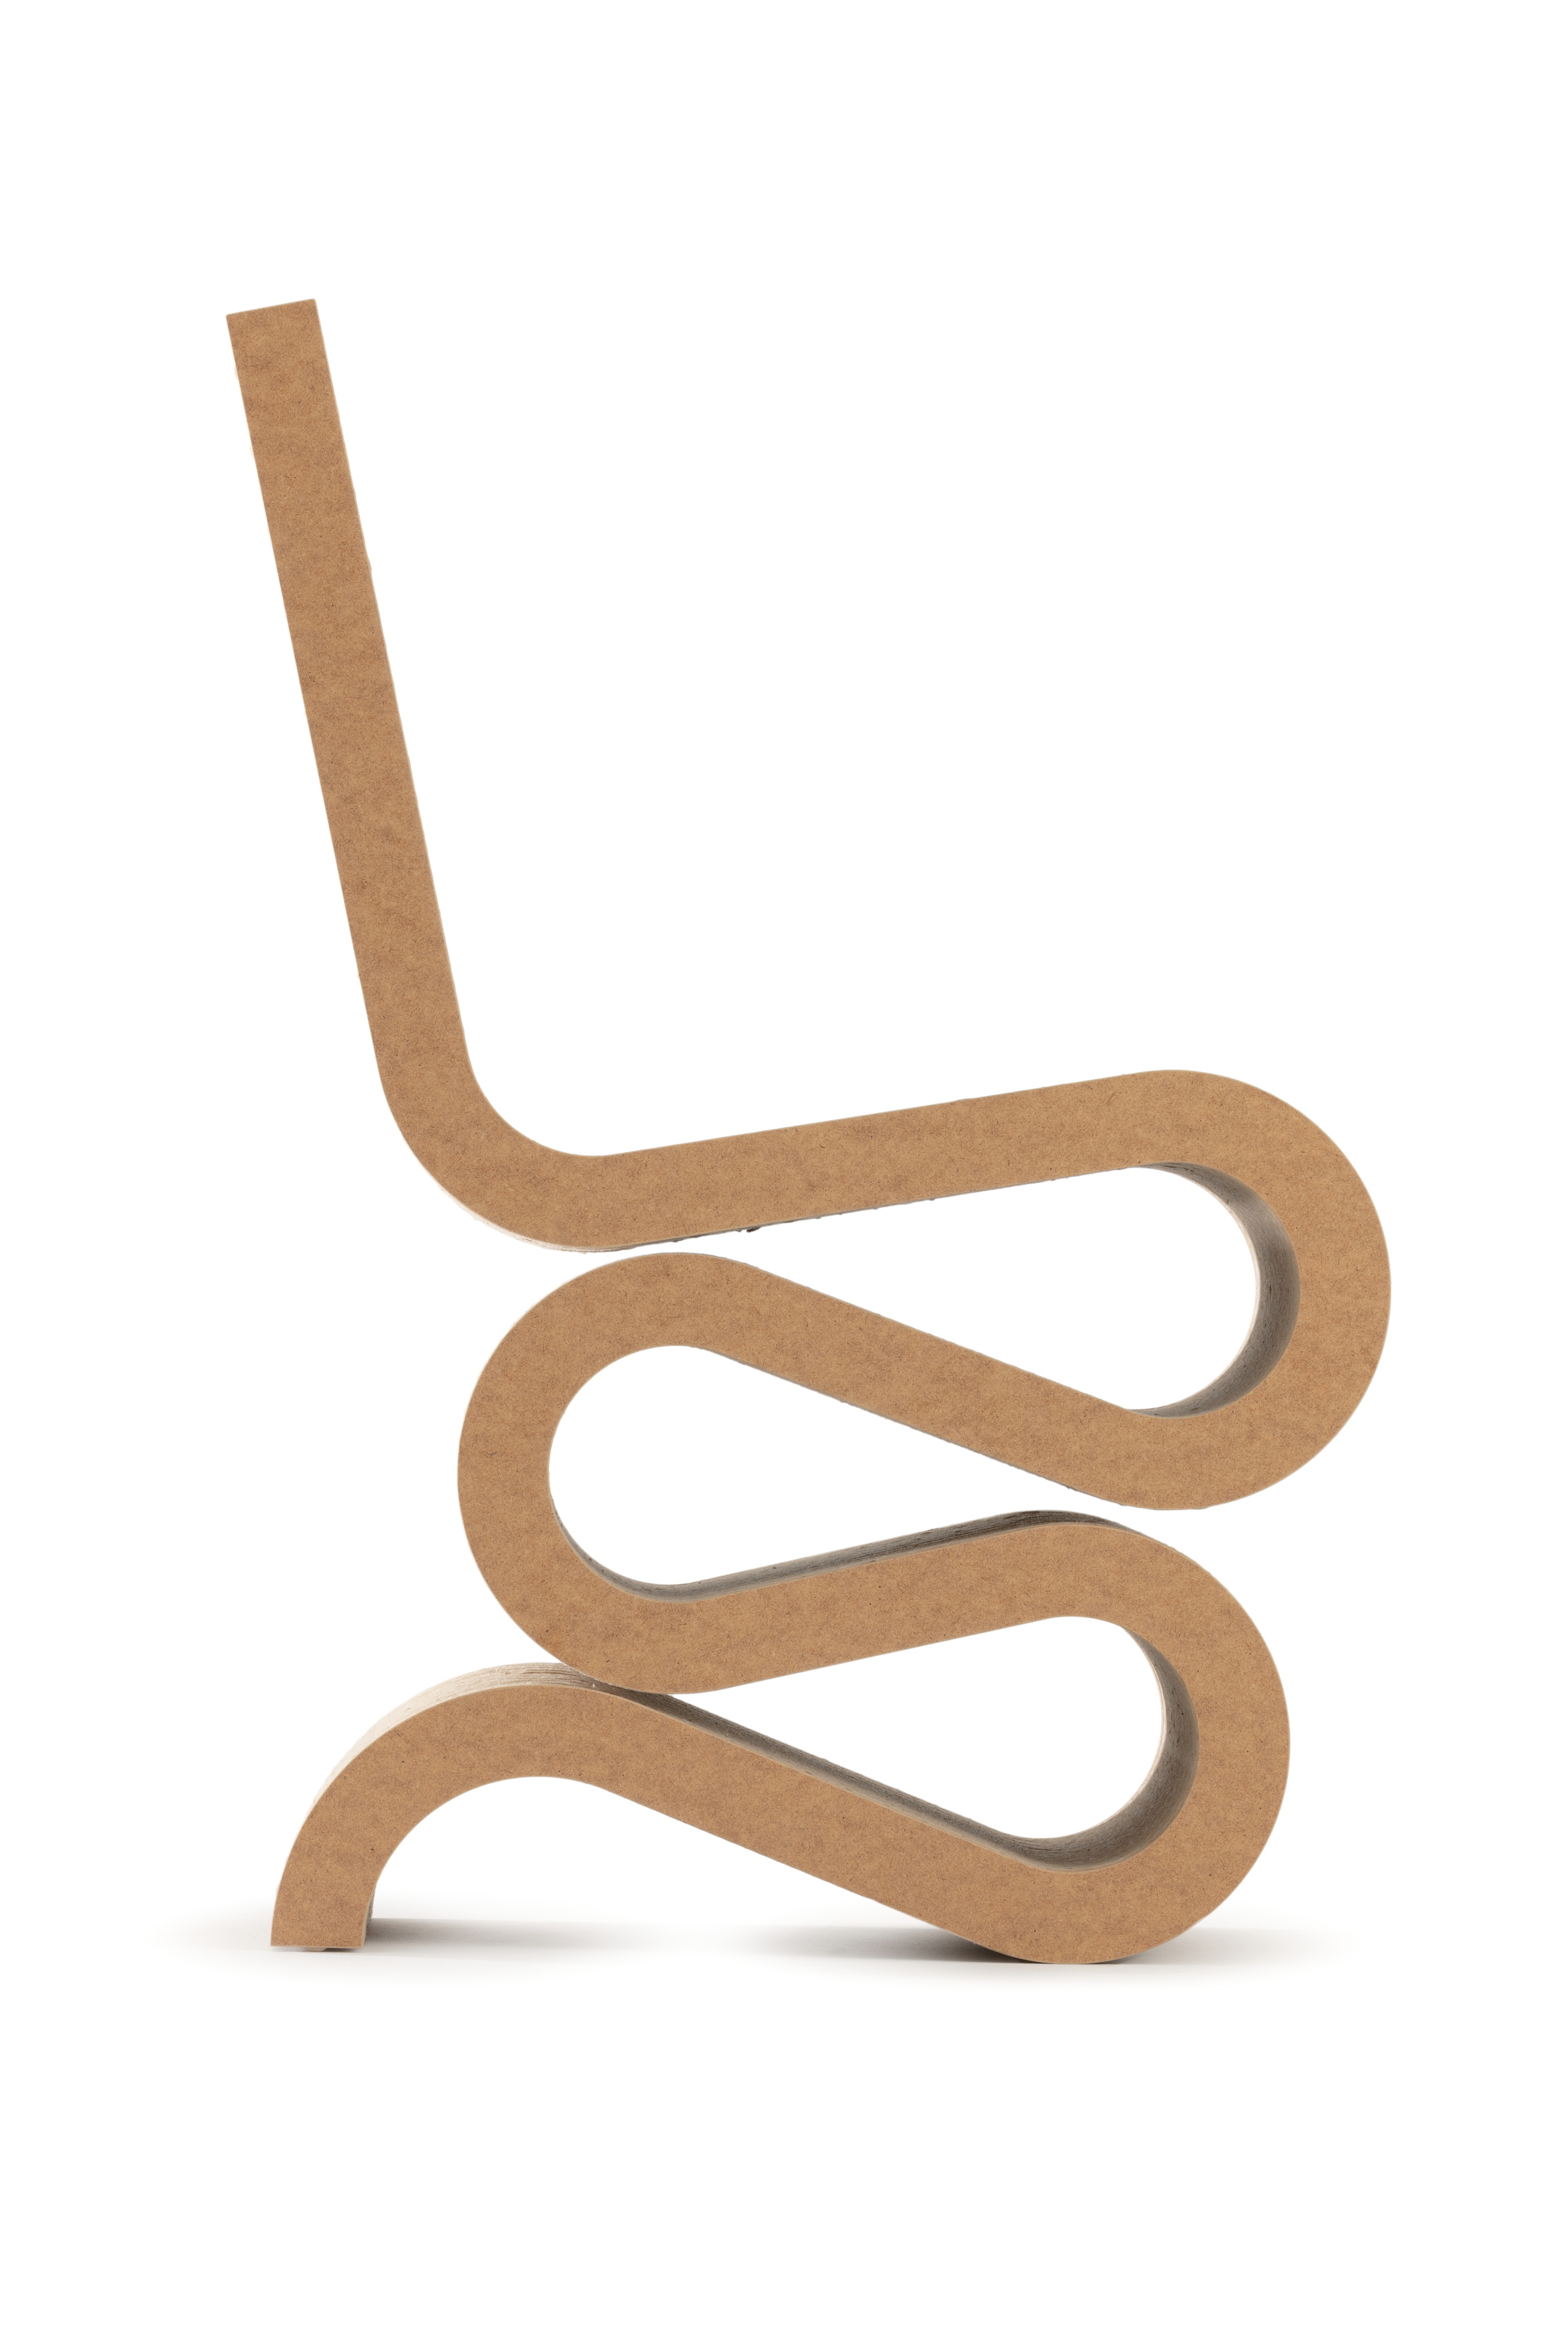 'Wiggle' chair by Frank Gehry